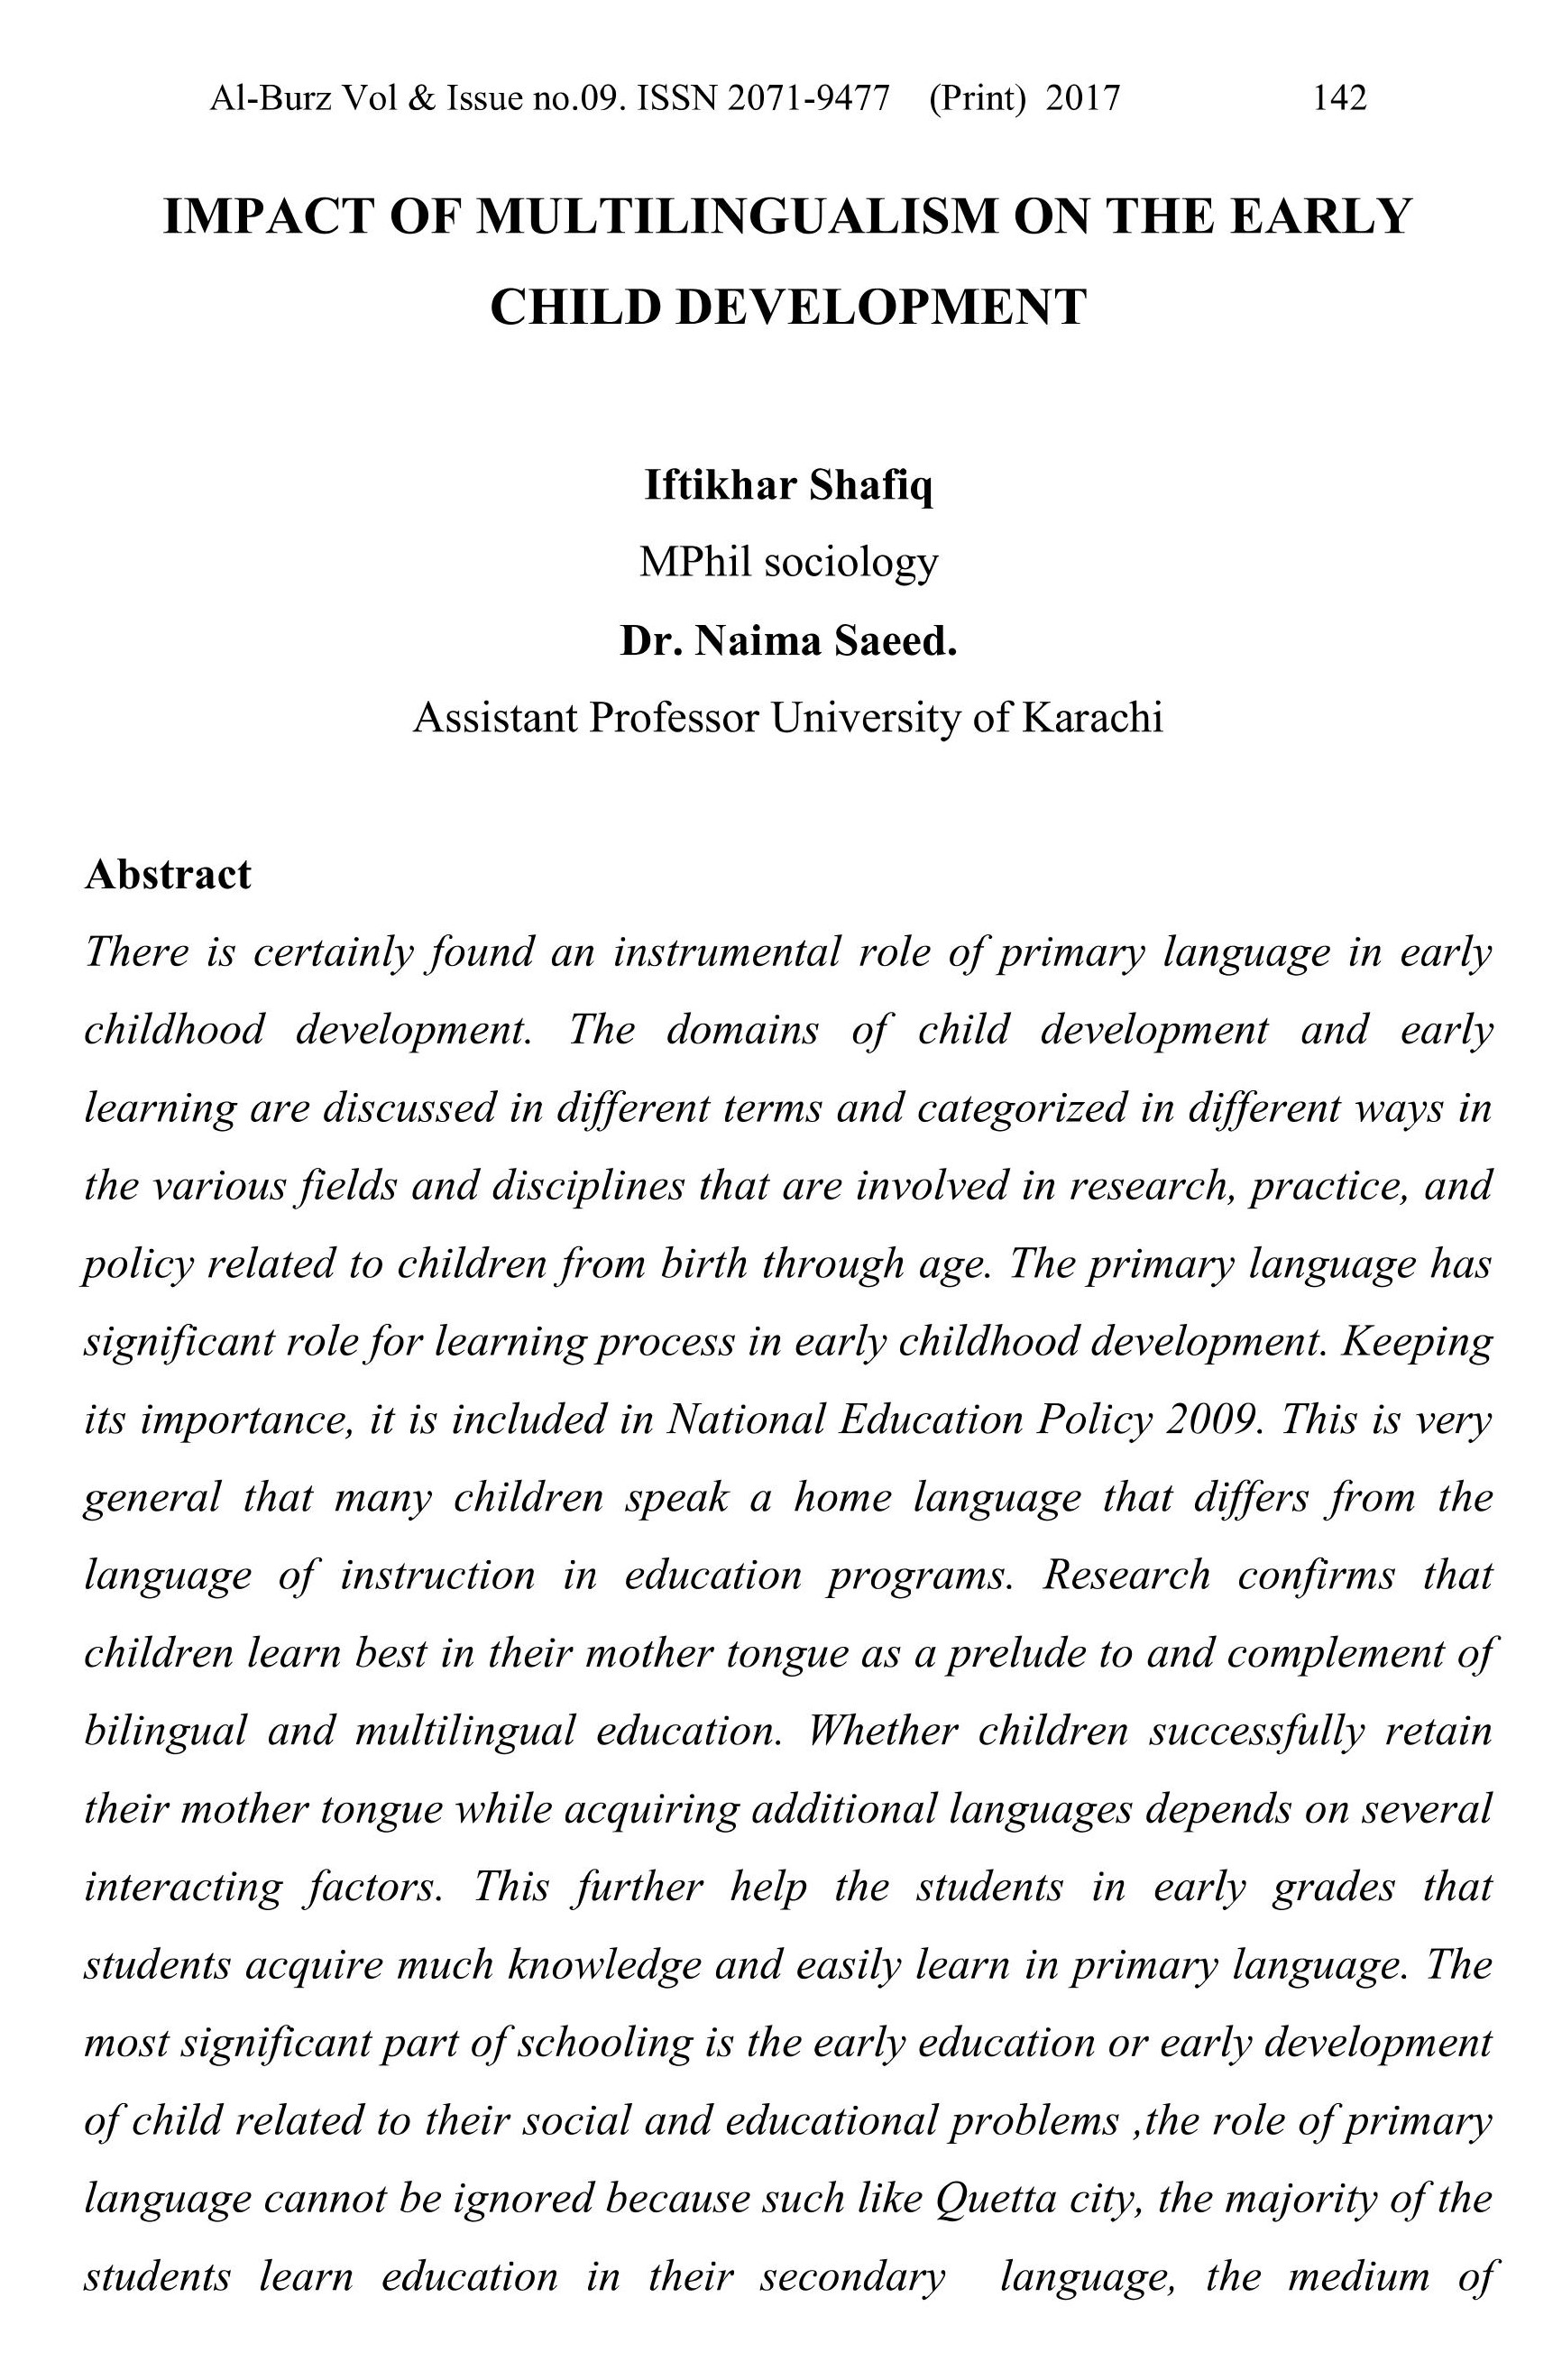 IMPACT OF MULTILINGUALISM ON THE EARLY CHILD DEVELOPMENT